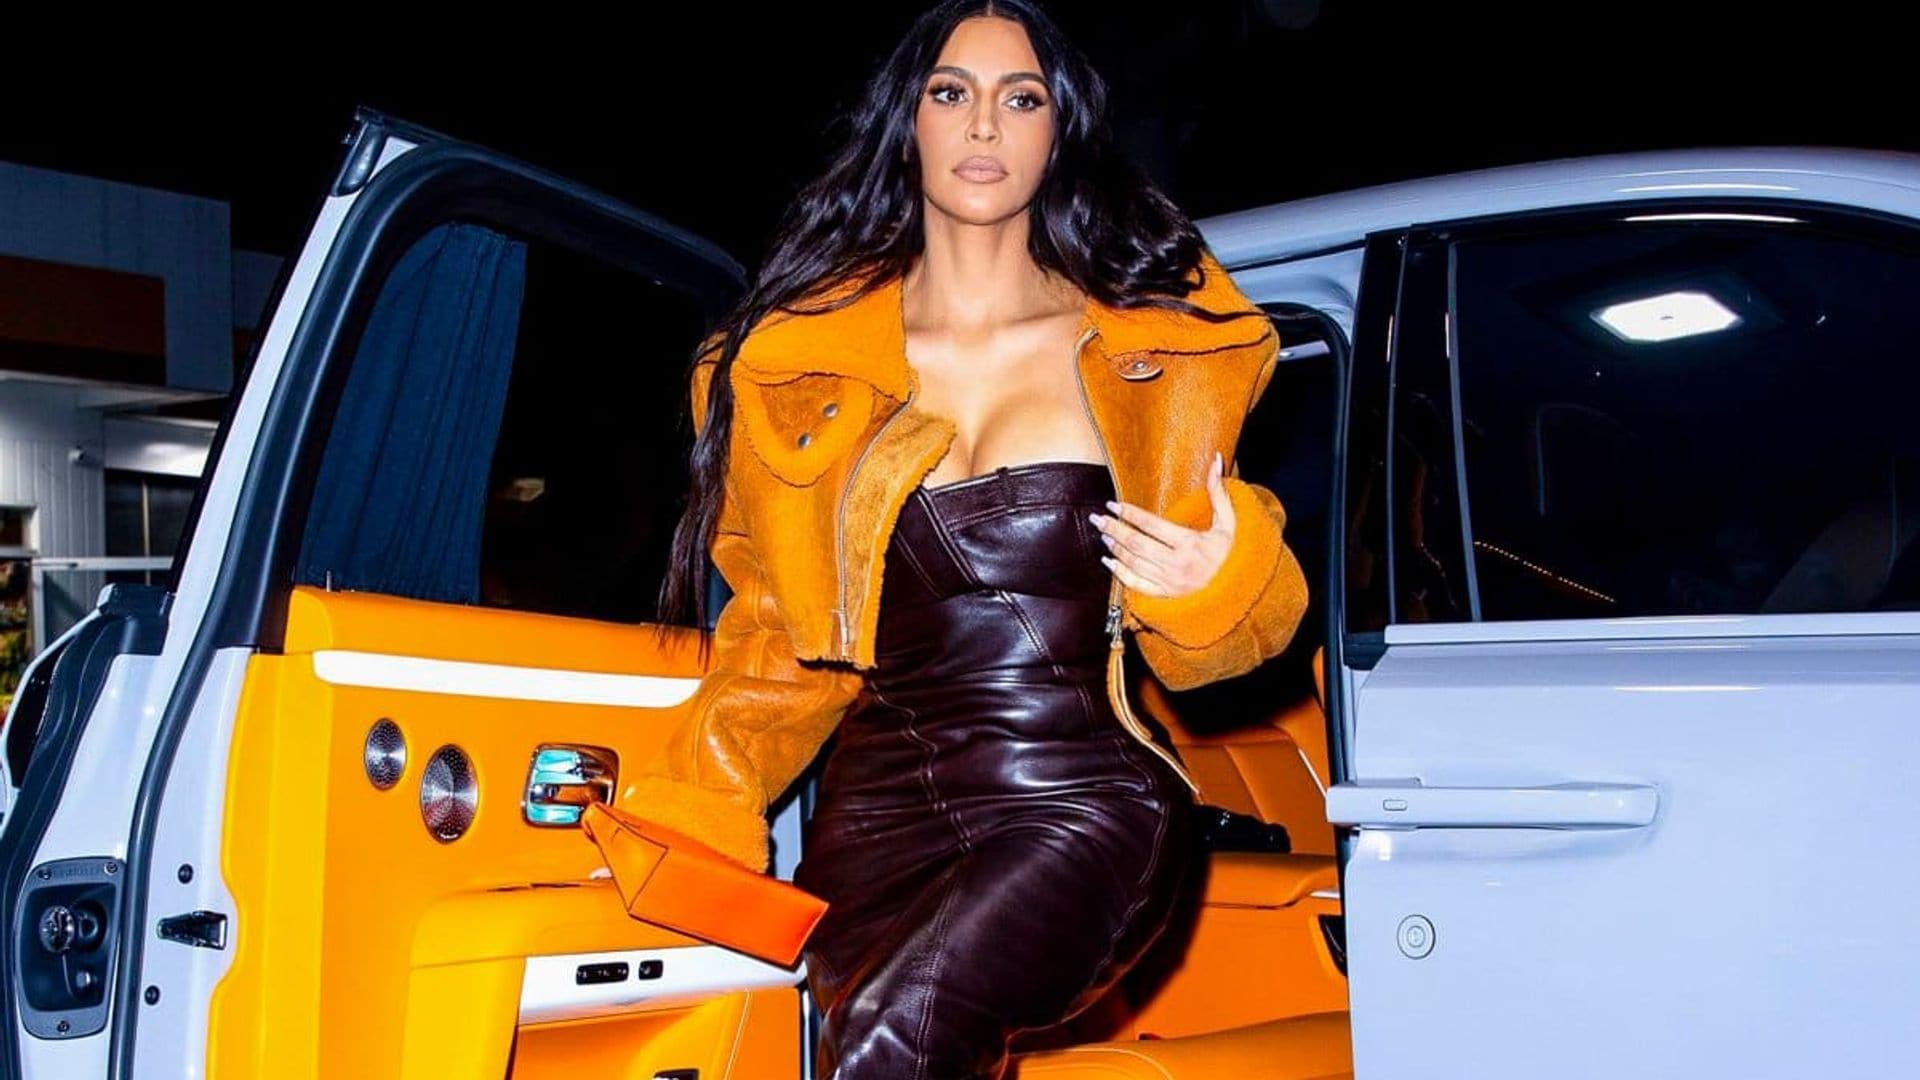 Kim Kardashian makes the gas station her runway while wearing her ex-husband’s YEEZY line